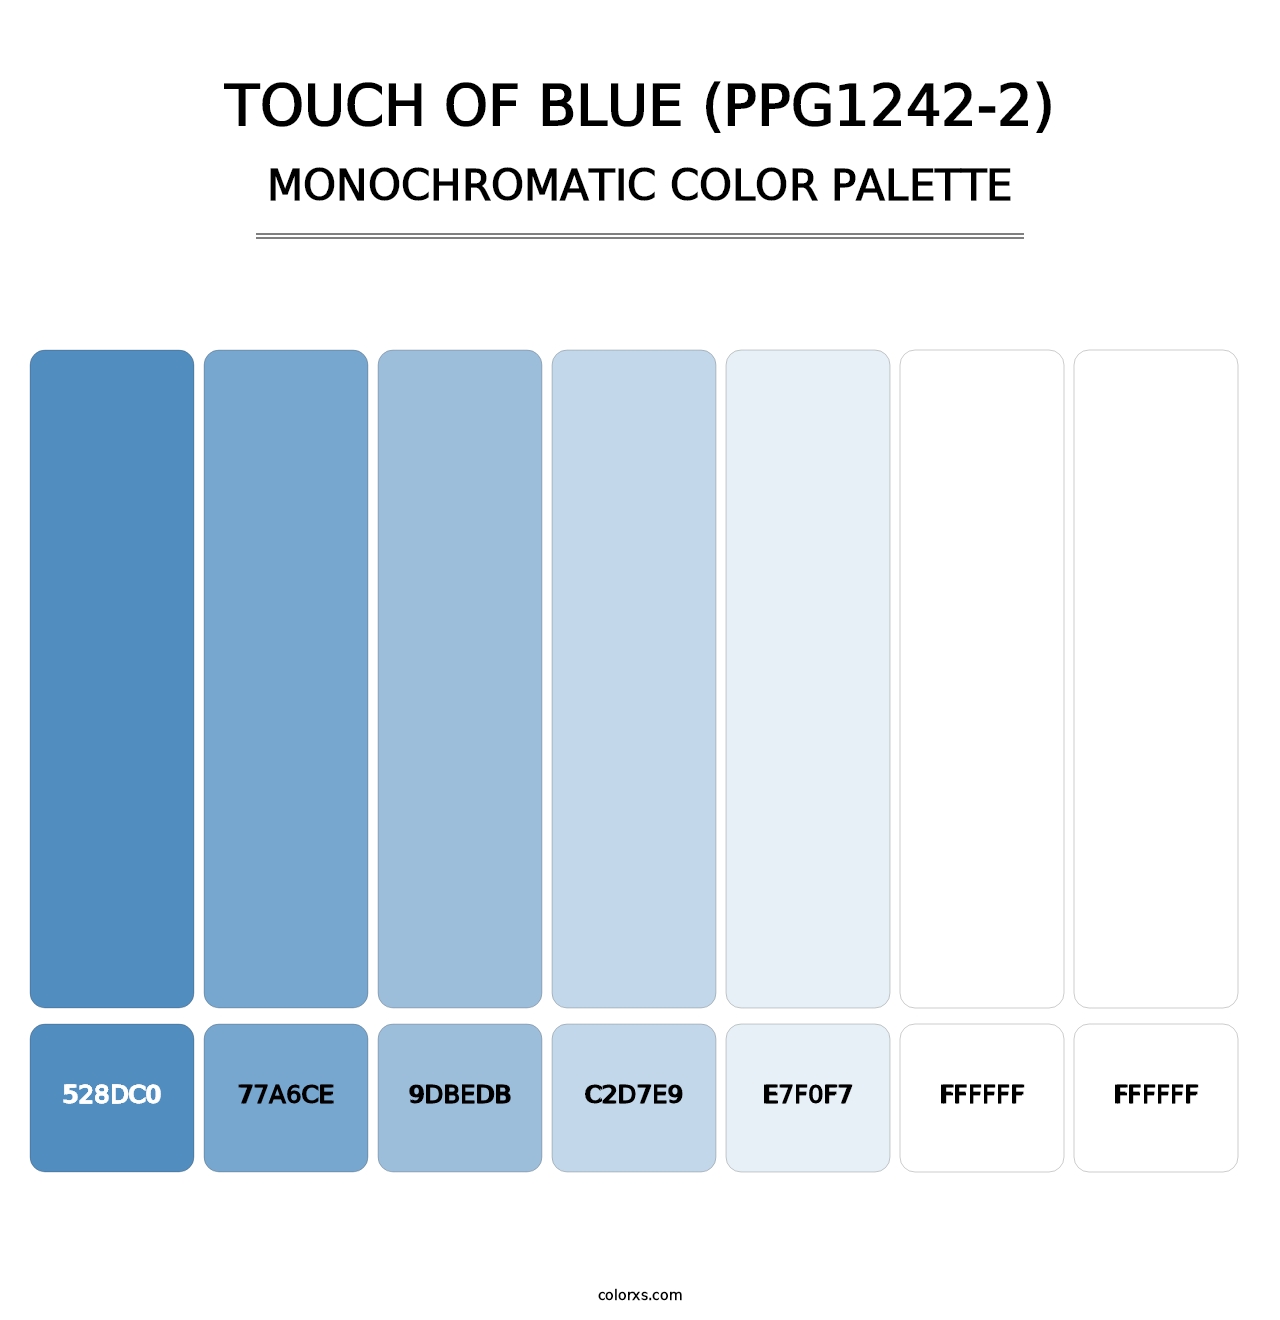 Touch Of Blue (PPG1242-2) - Monochromatic Color Palette